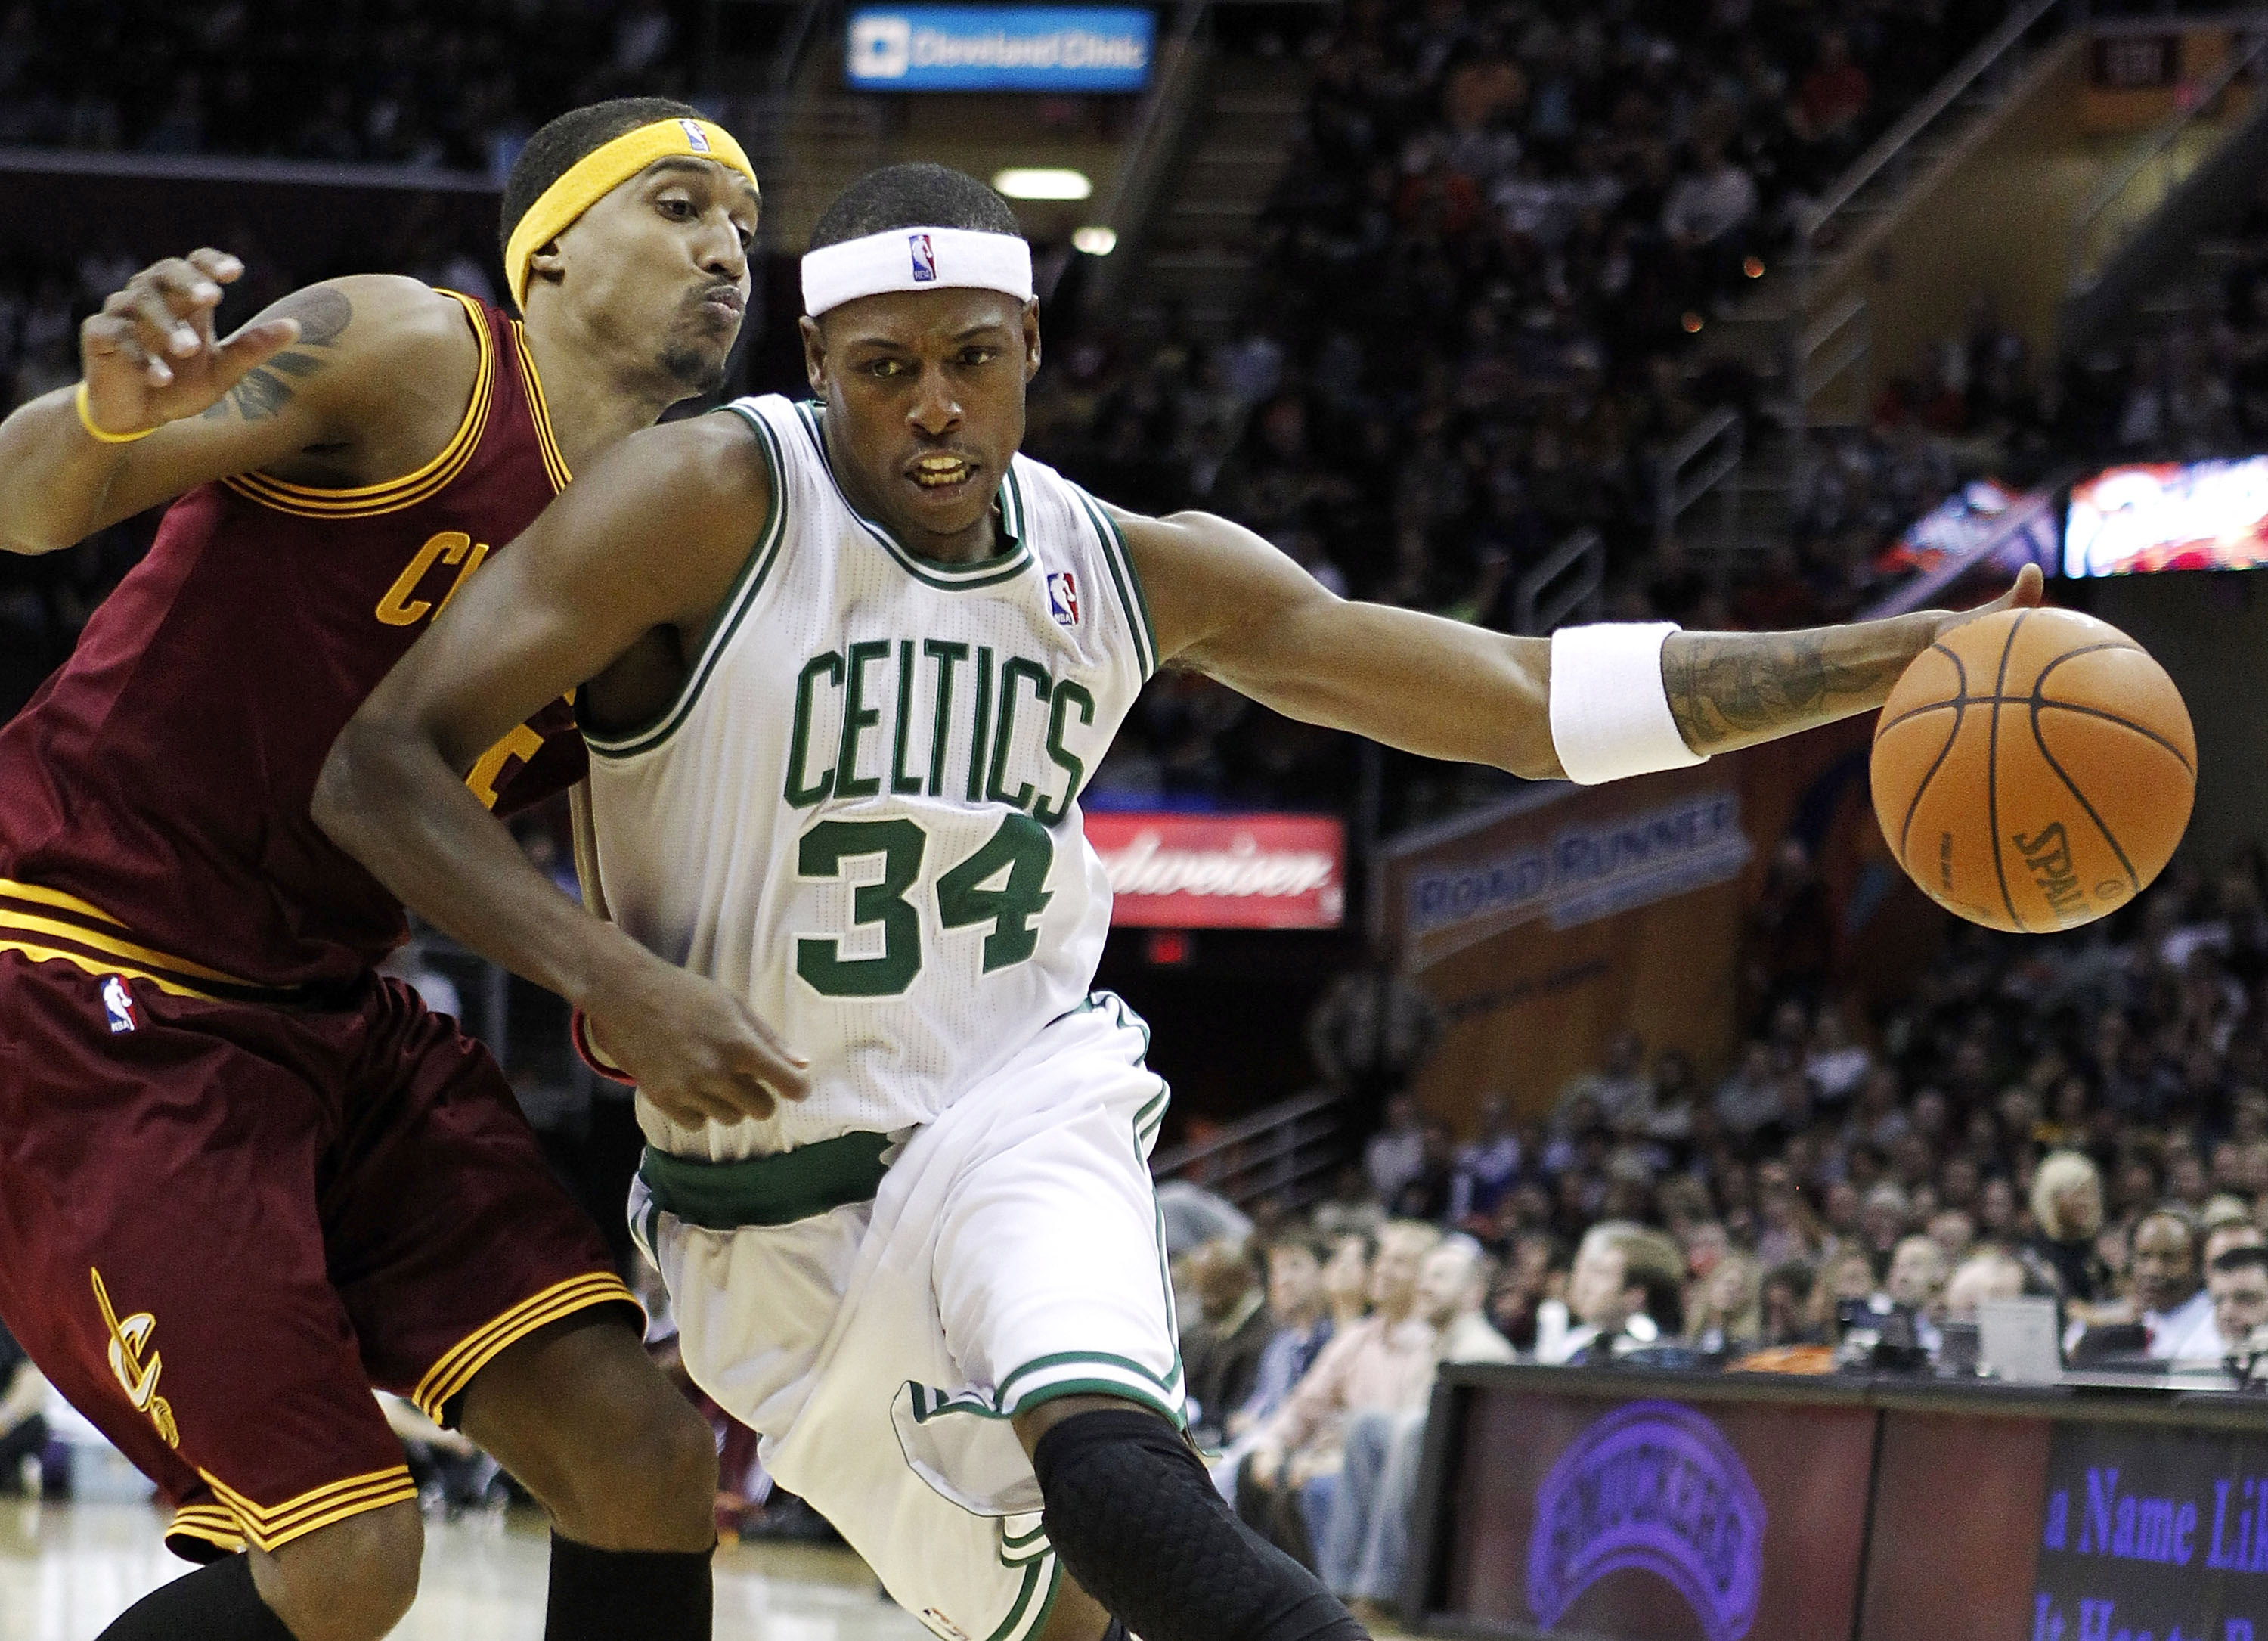 CLEVELAND - OCTOBER 27:  Paul Pierce #34 of the Boston Celtics tries to get around Jamario Moon #15 of the Cleveland Cavaliers at Quicken Loans Arena on October 27, 2010 in Cleveland, Ohio.  (Photo by Gregory Shamus/Getty Images)